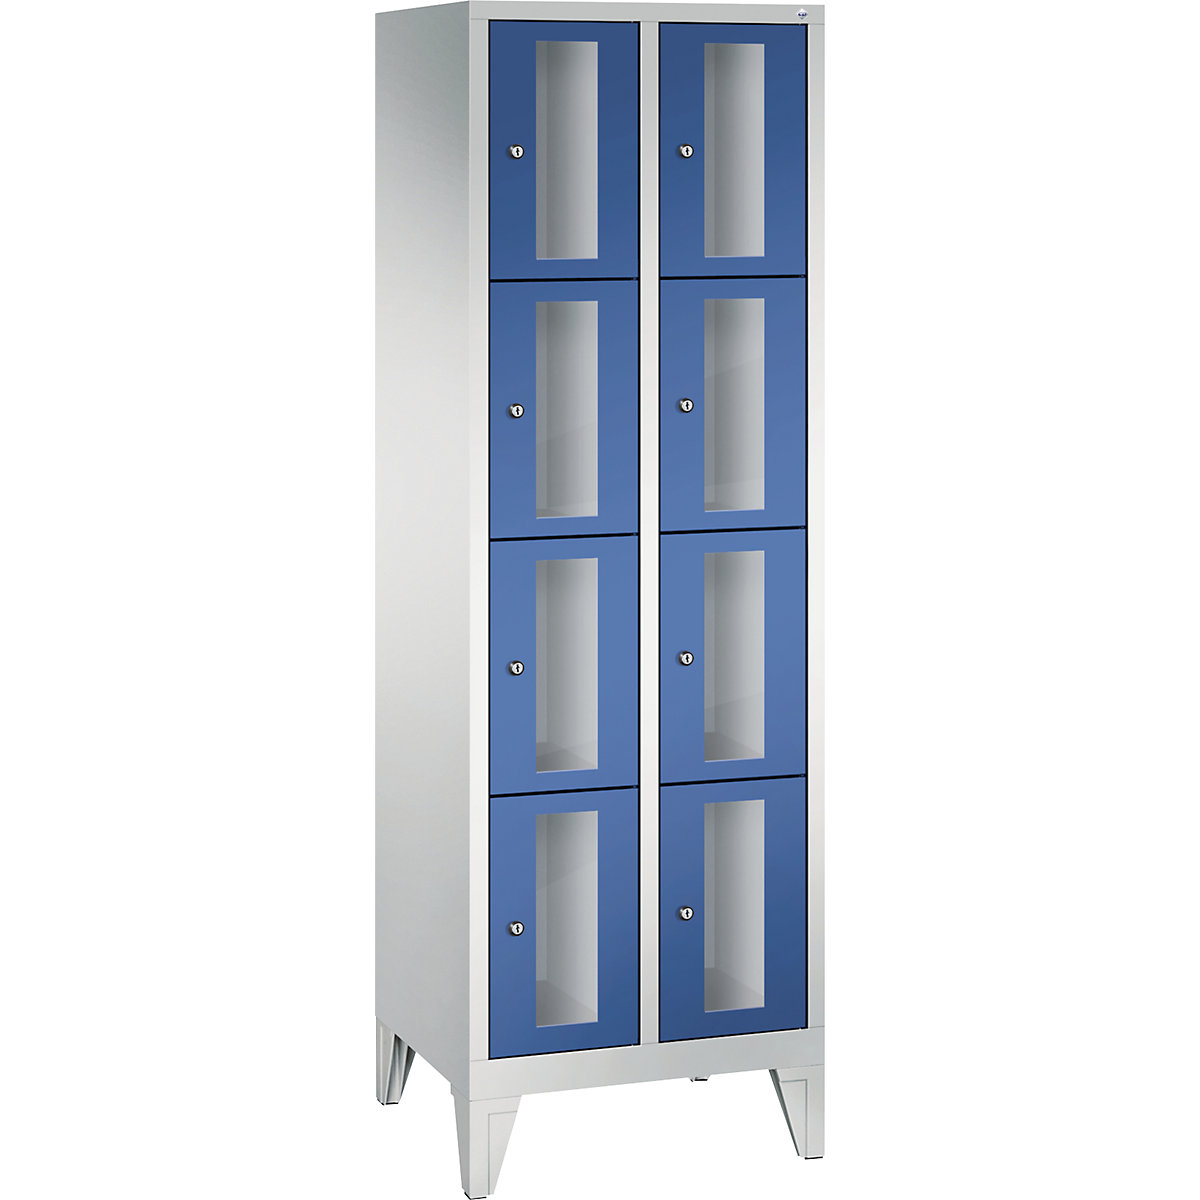 C+P – CLASSIC locker unit, compartment height 375 mm, with feet, 8 compartments, width 610 mm, gentian blue door